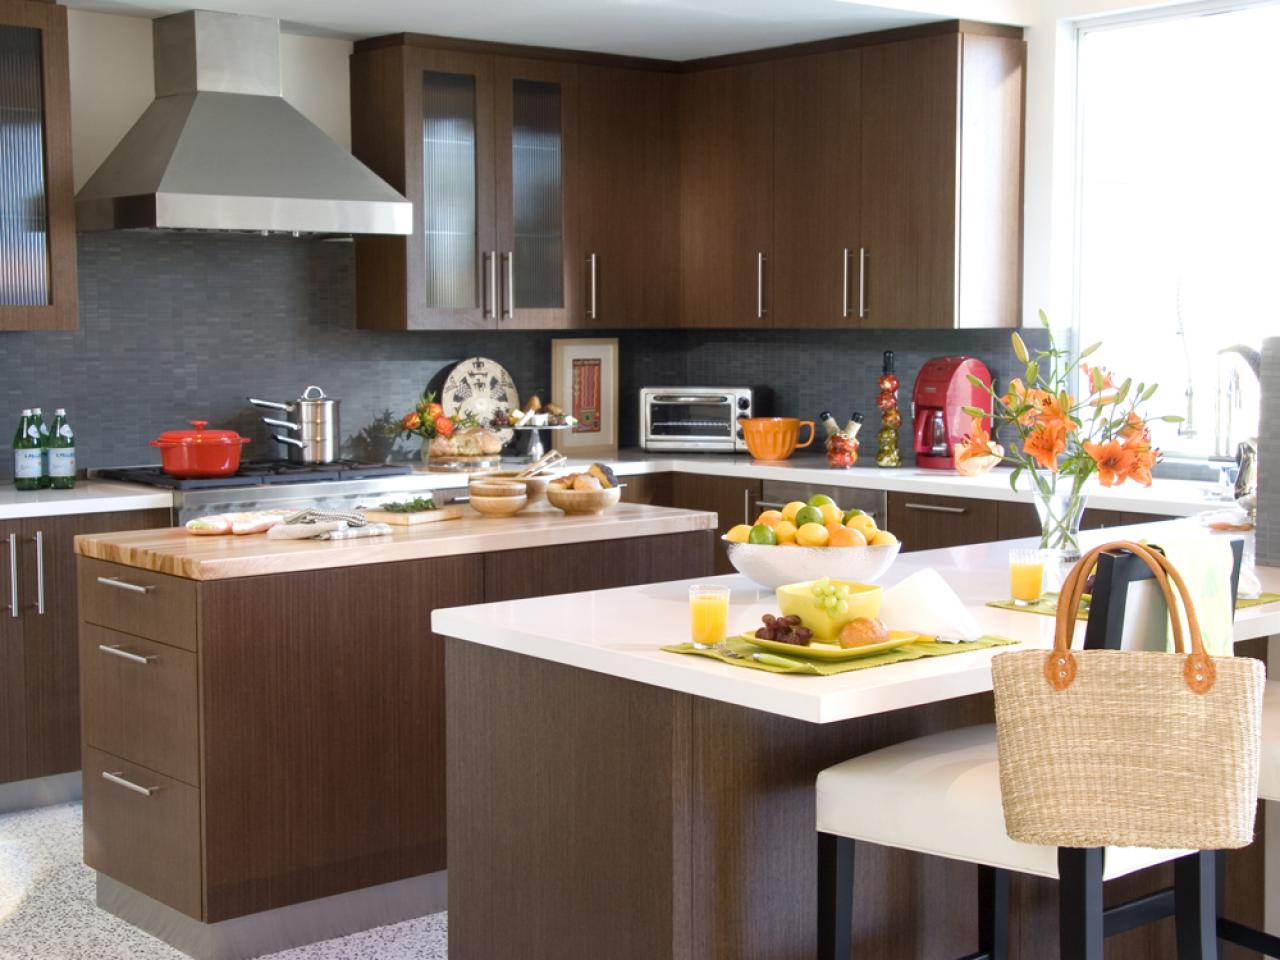 Kitchen Cabinets Pictures, Affordable Contemporary Kitchen Cabinets